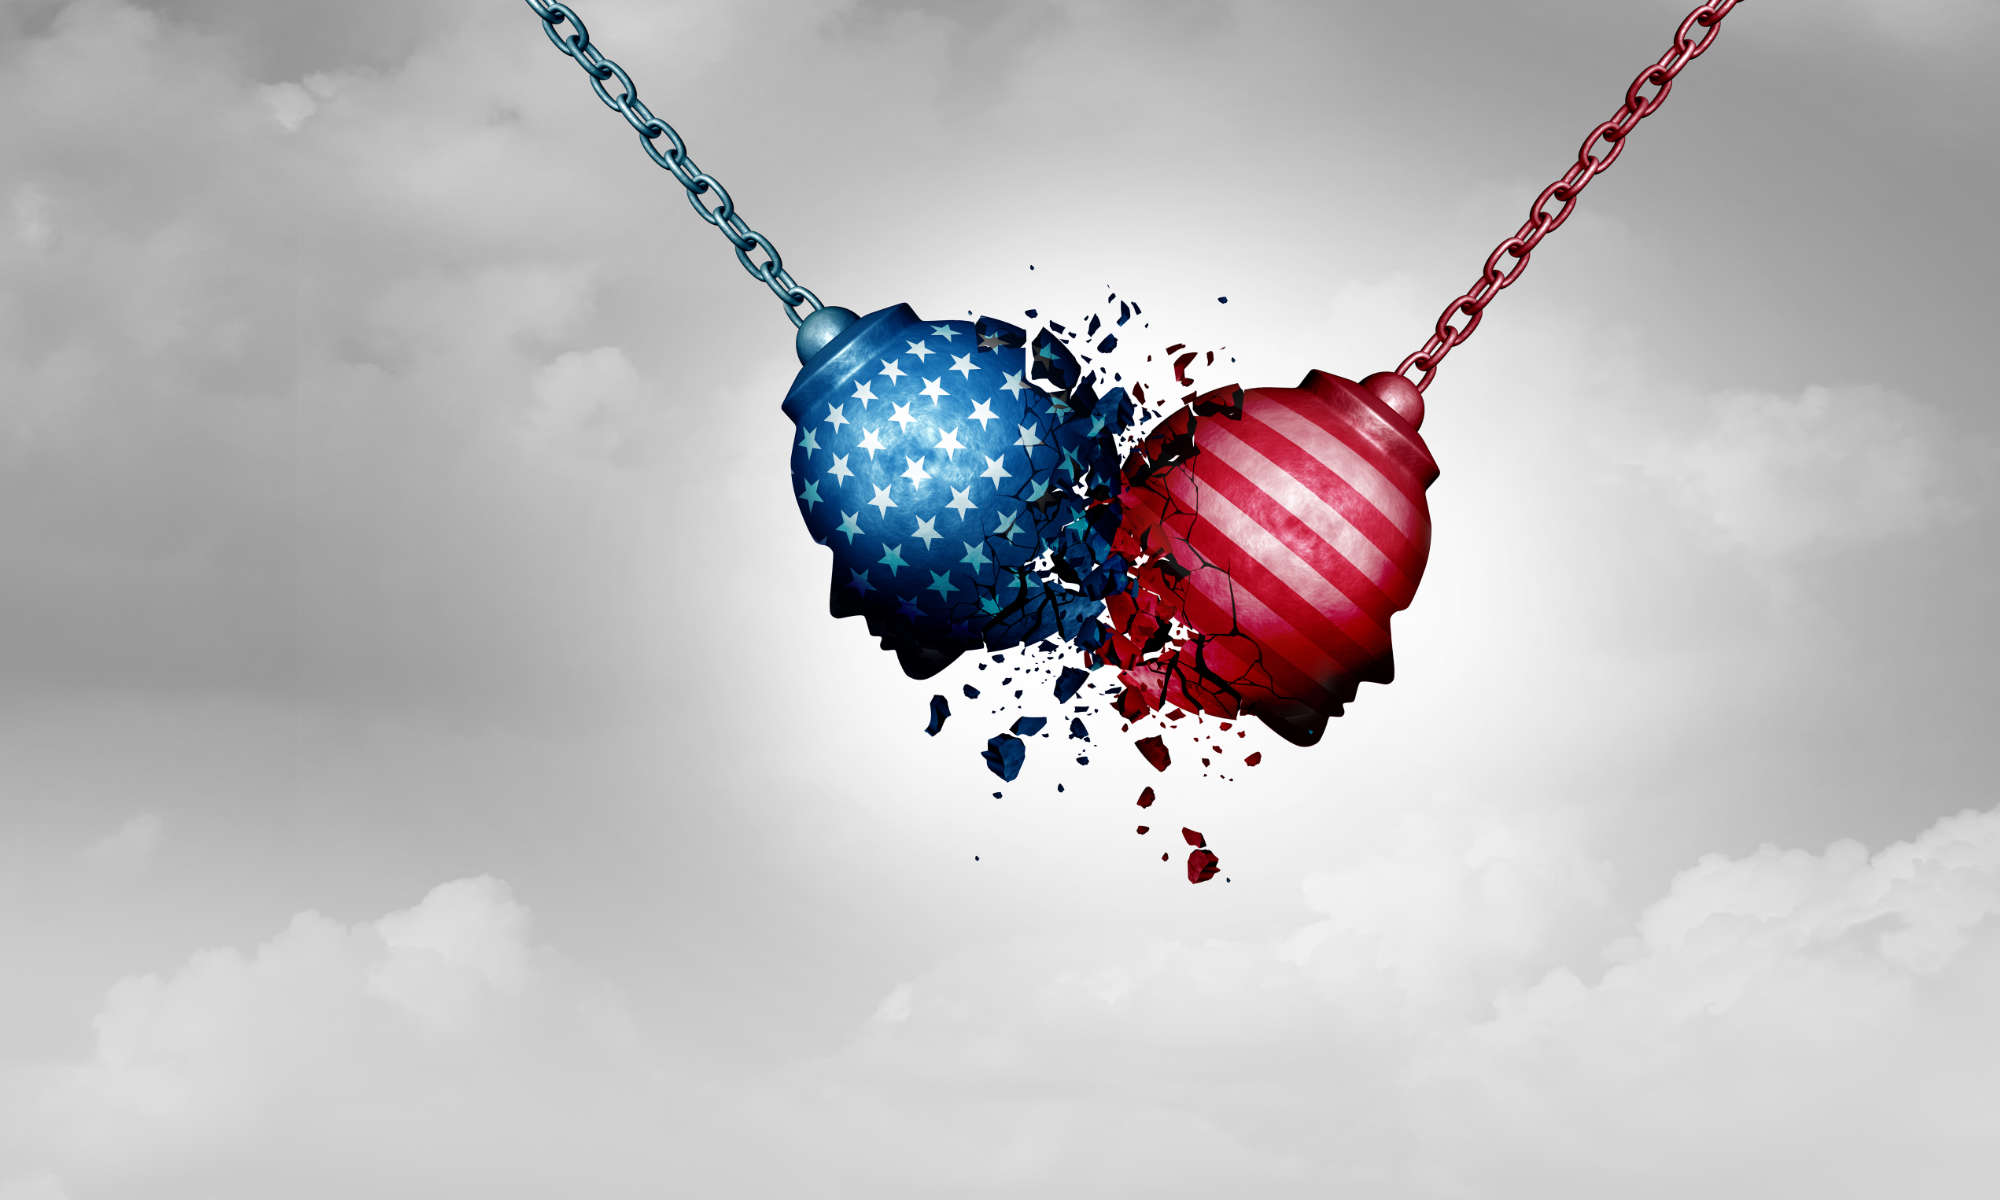 Illustration showing two wrecking balls, one blue with stars and one red with stripes, each with a profile of a face, crashing against each other against a gray background to illustrate partisan hostility in American democracy.